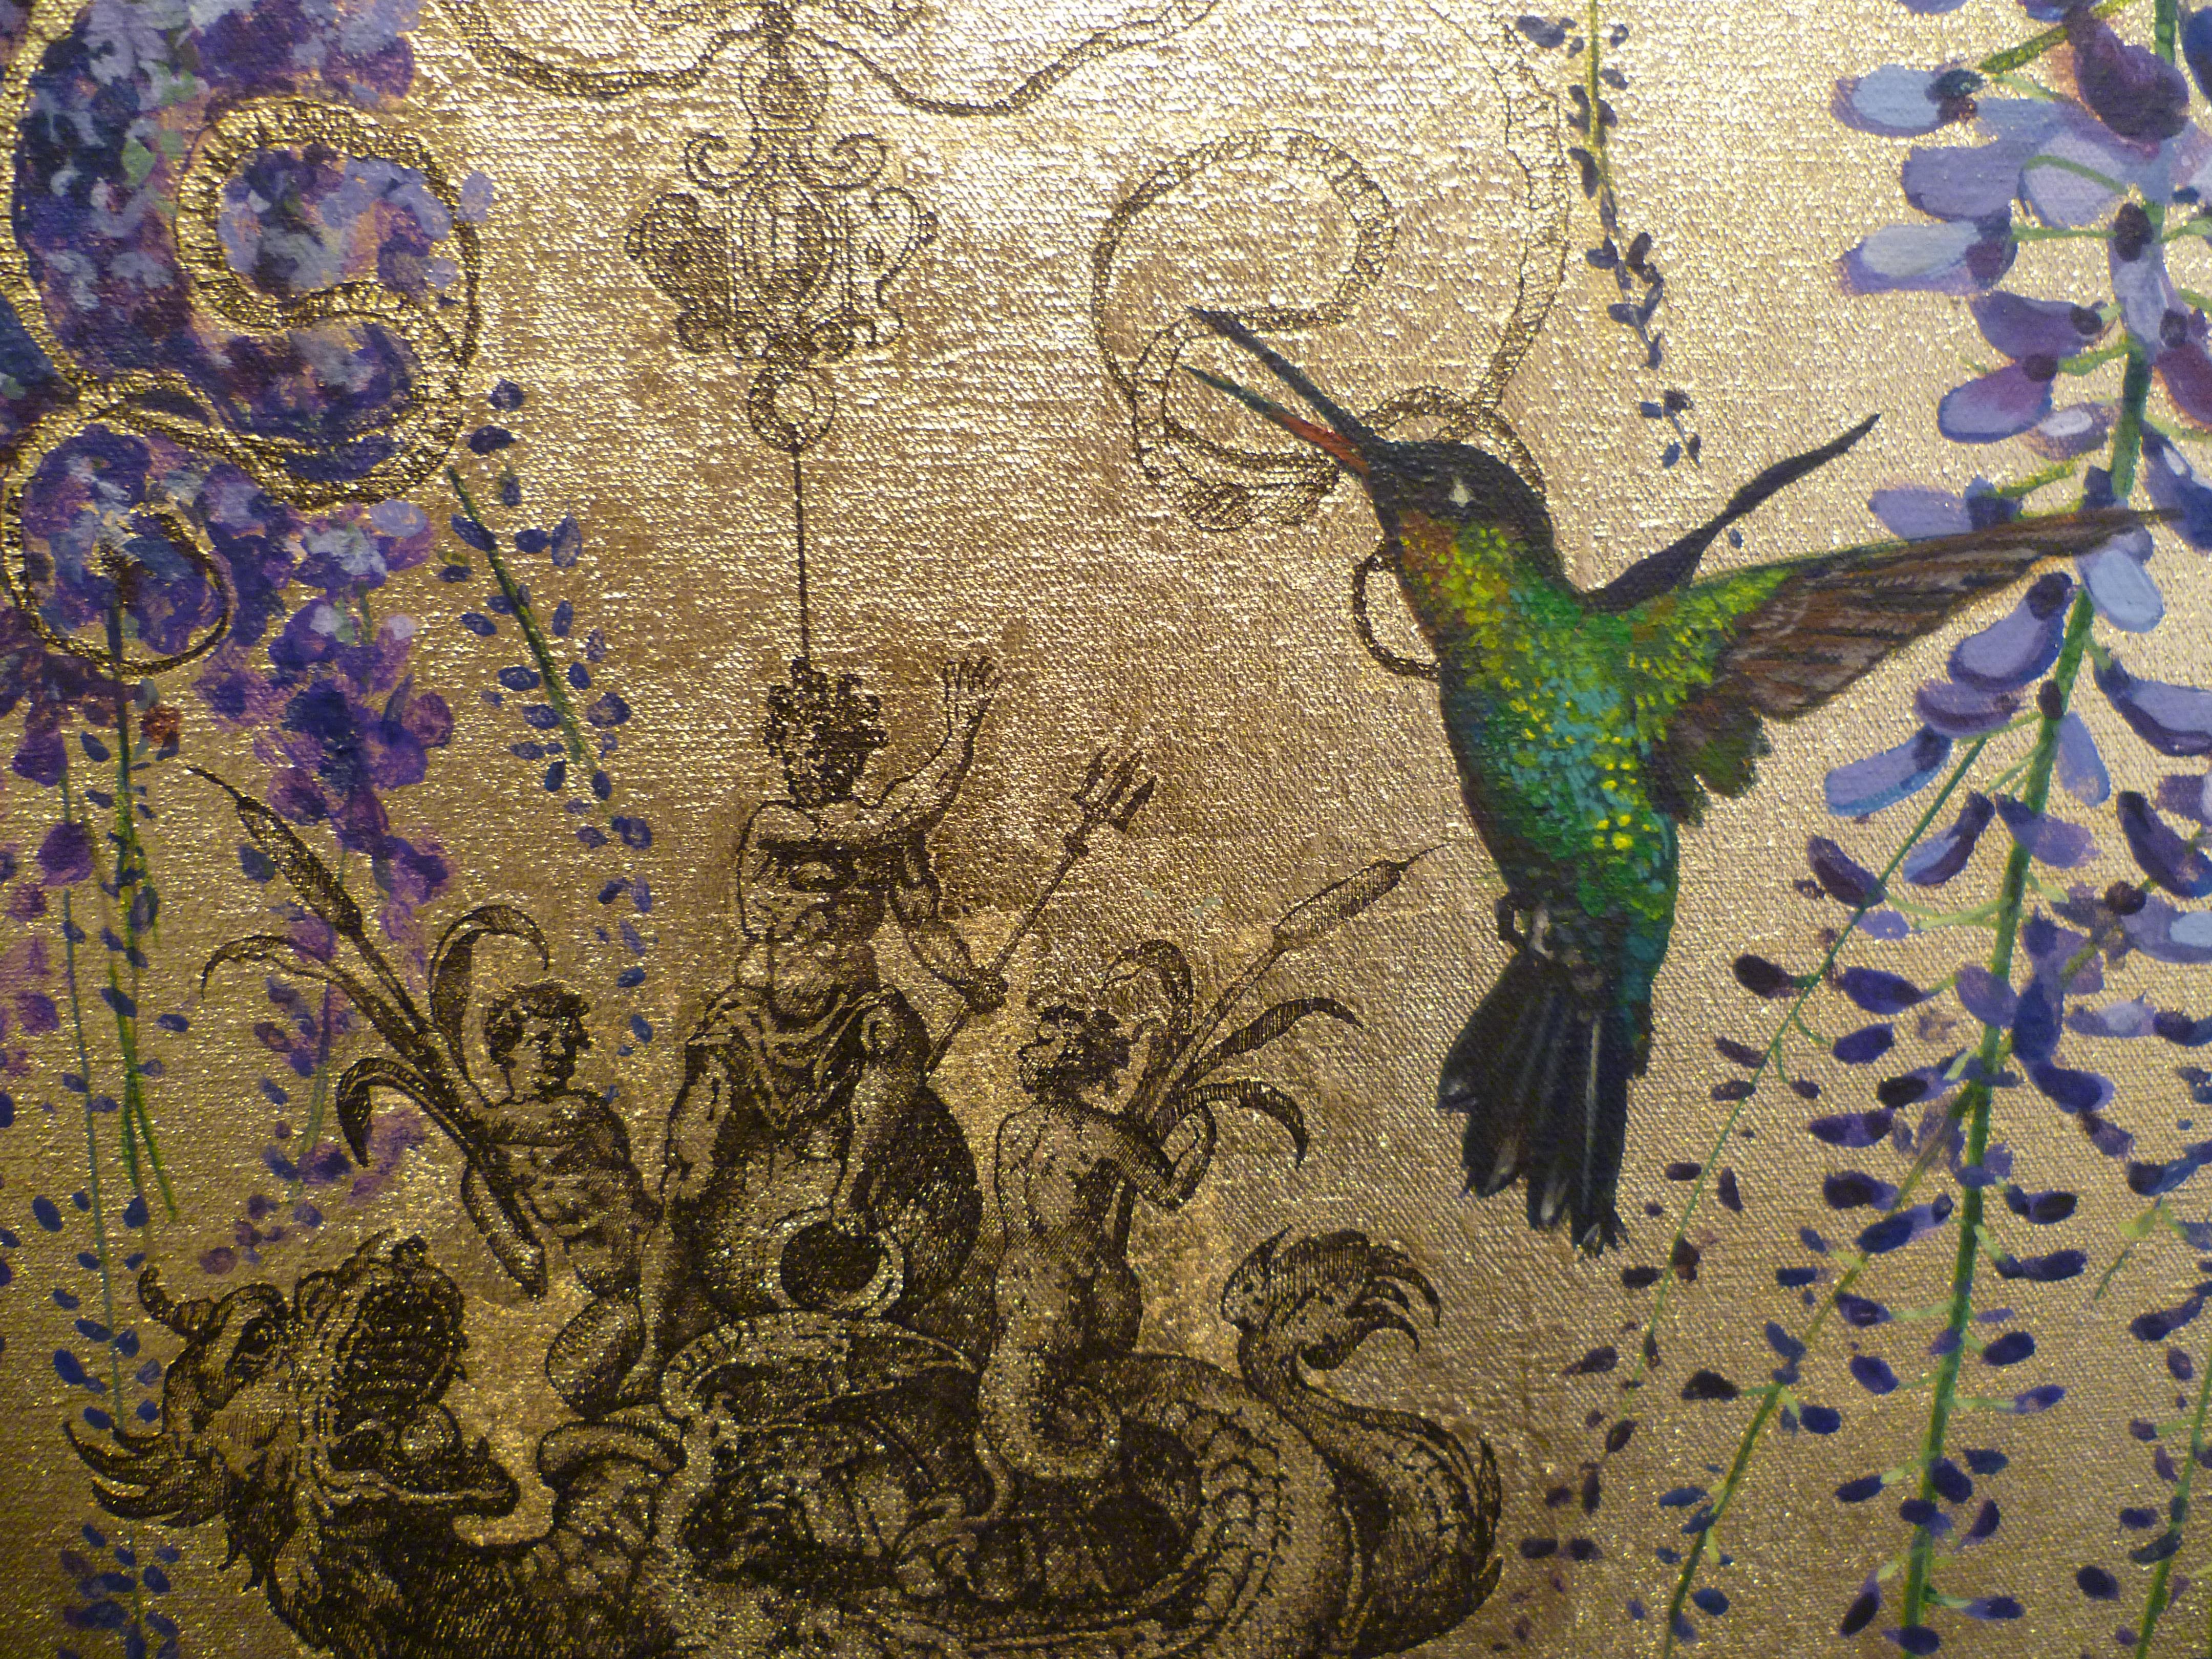 Oro 29 - collaborative work, decorative mixed media with gold, birds and flowers - Contemporary Mixed Media Art by Keng Wai Lee & Marco Araldi